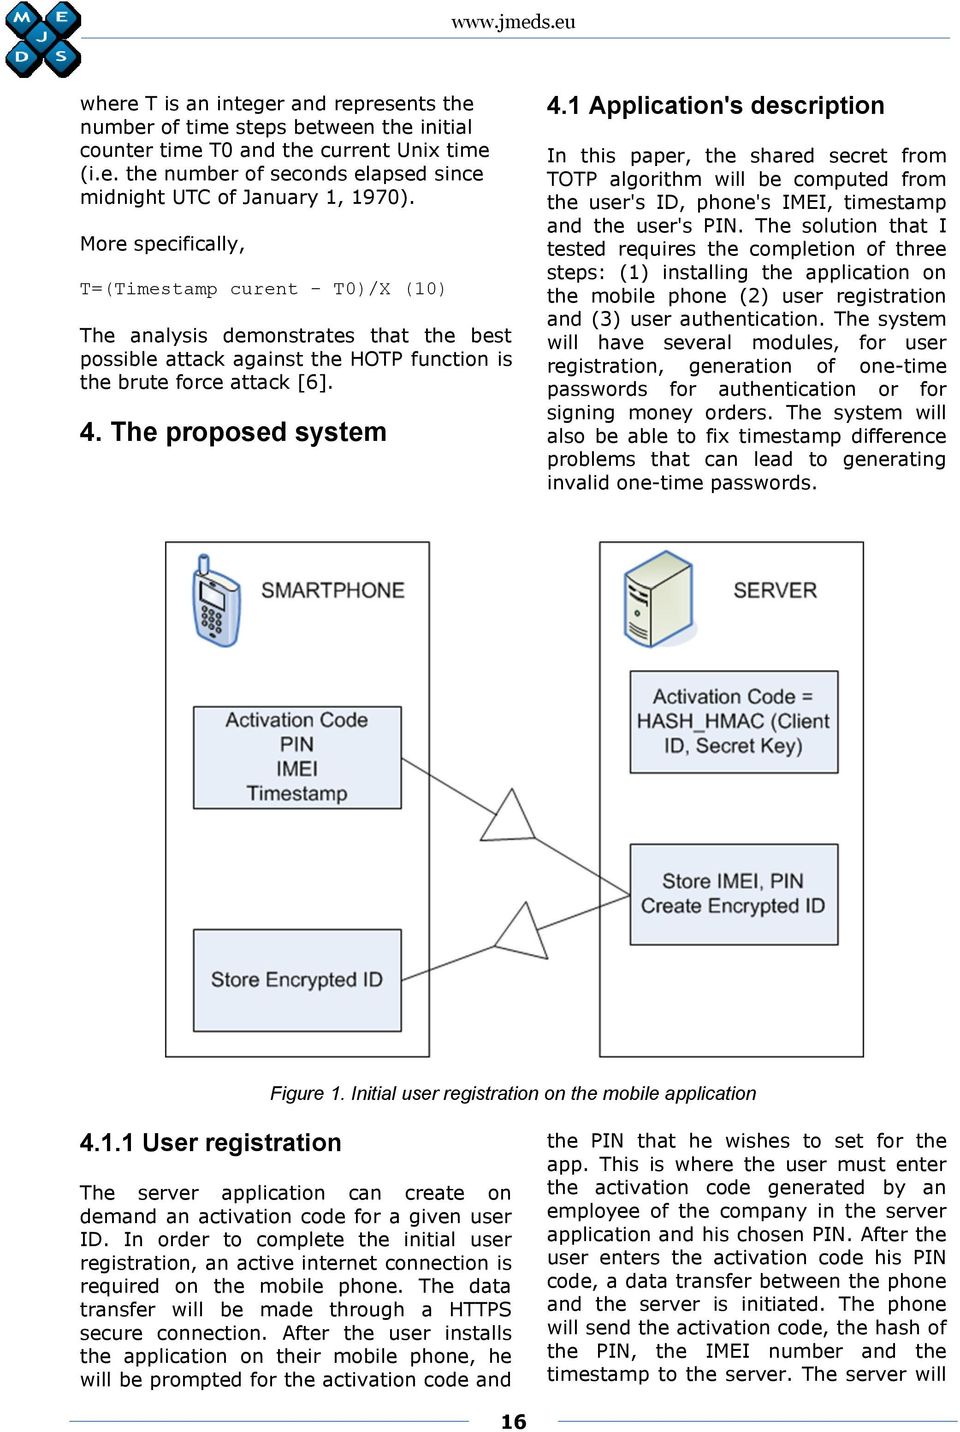 1 Application's description In this paper, the shared secret from TOTP algorithm will be computed from the user's ID, phone's IMEI, timestamp and the user's PIN.